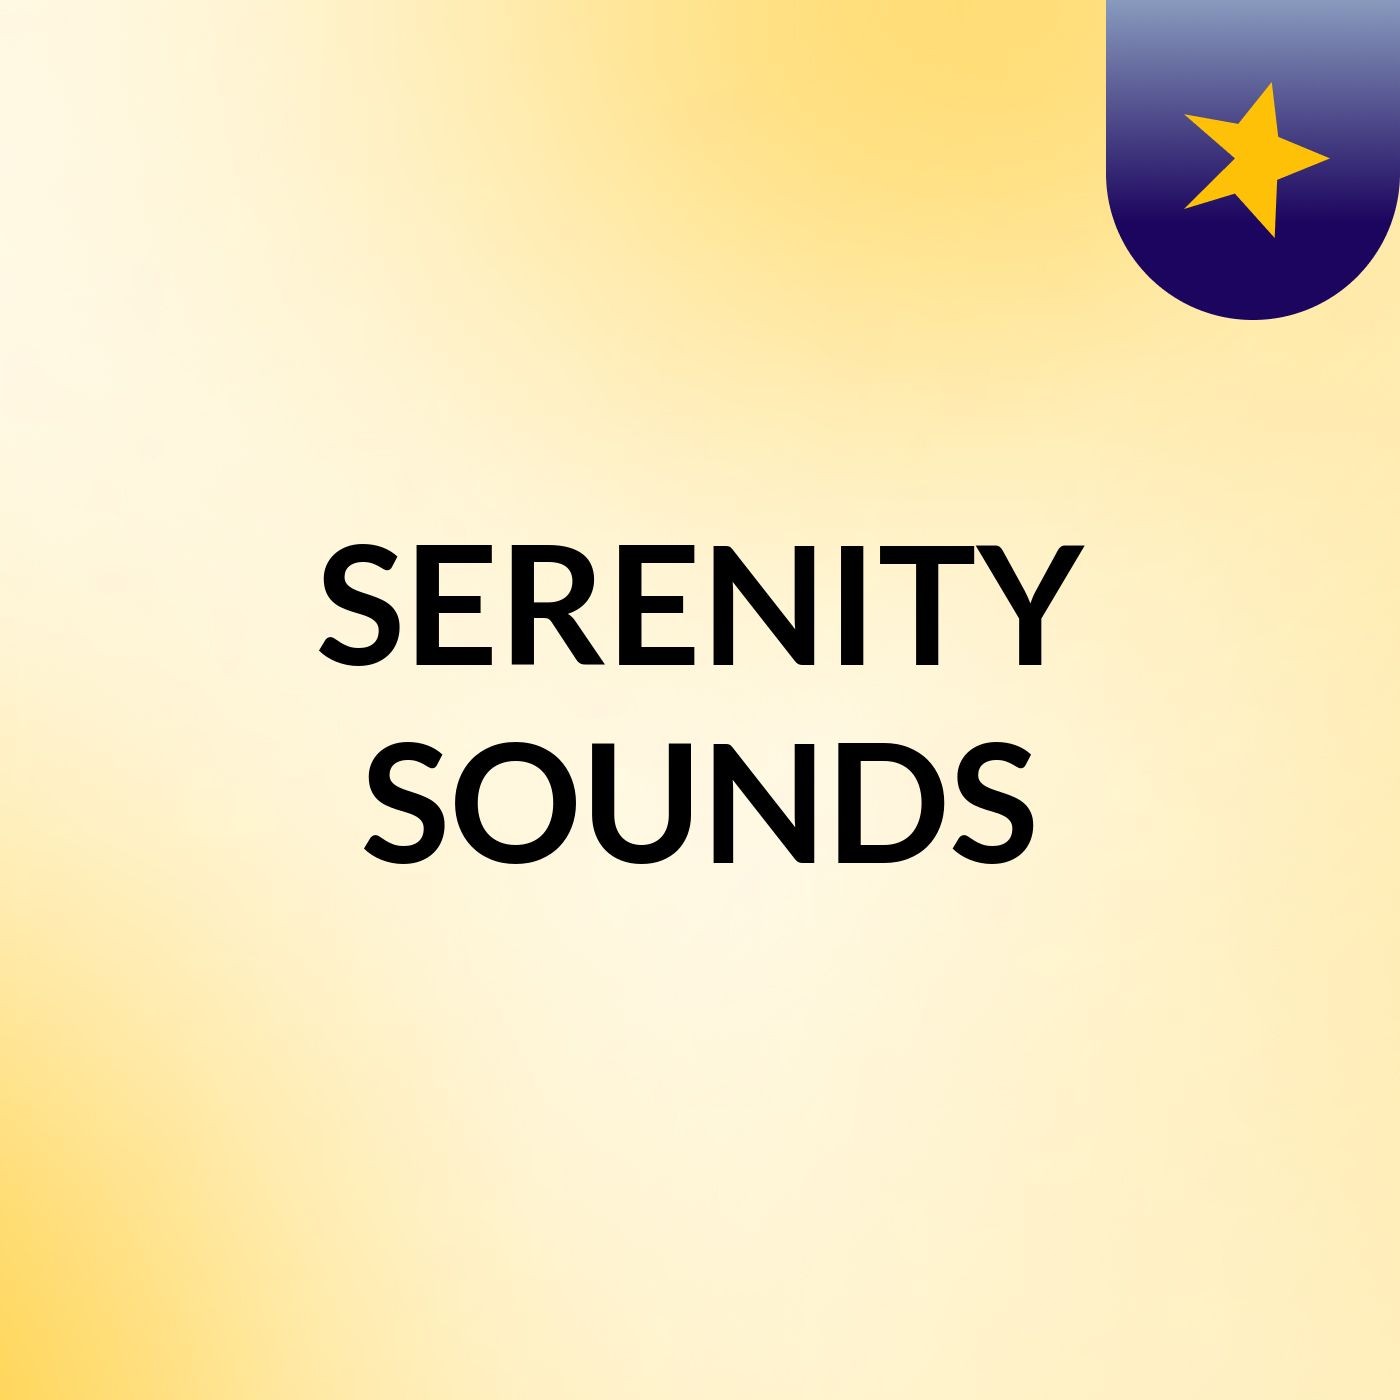 SERENITY SOUNDS